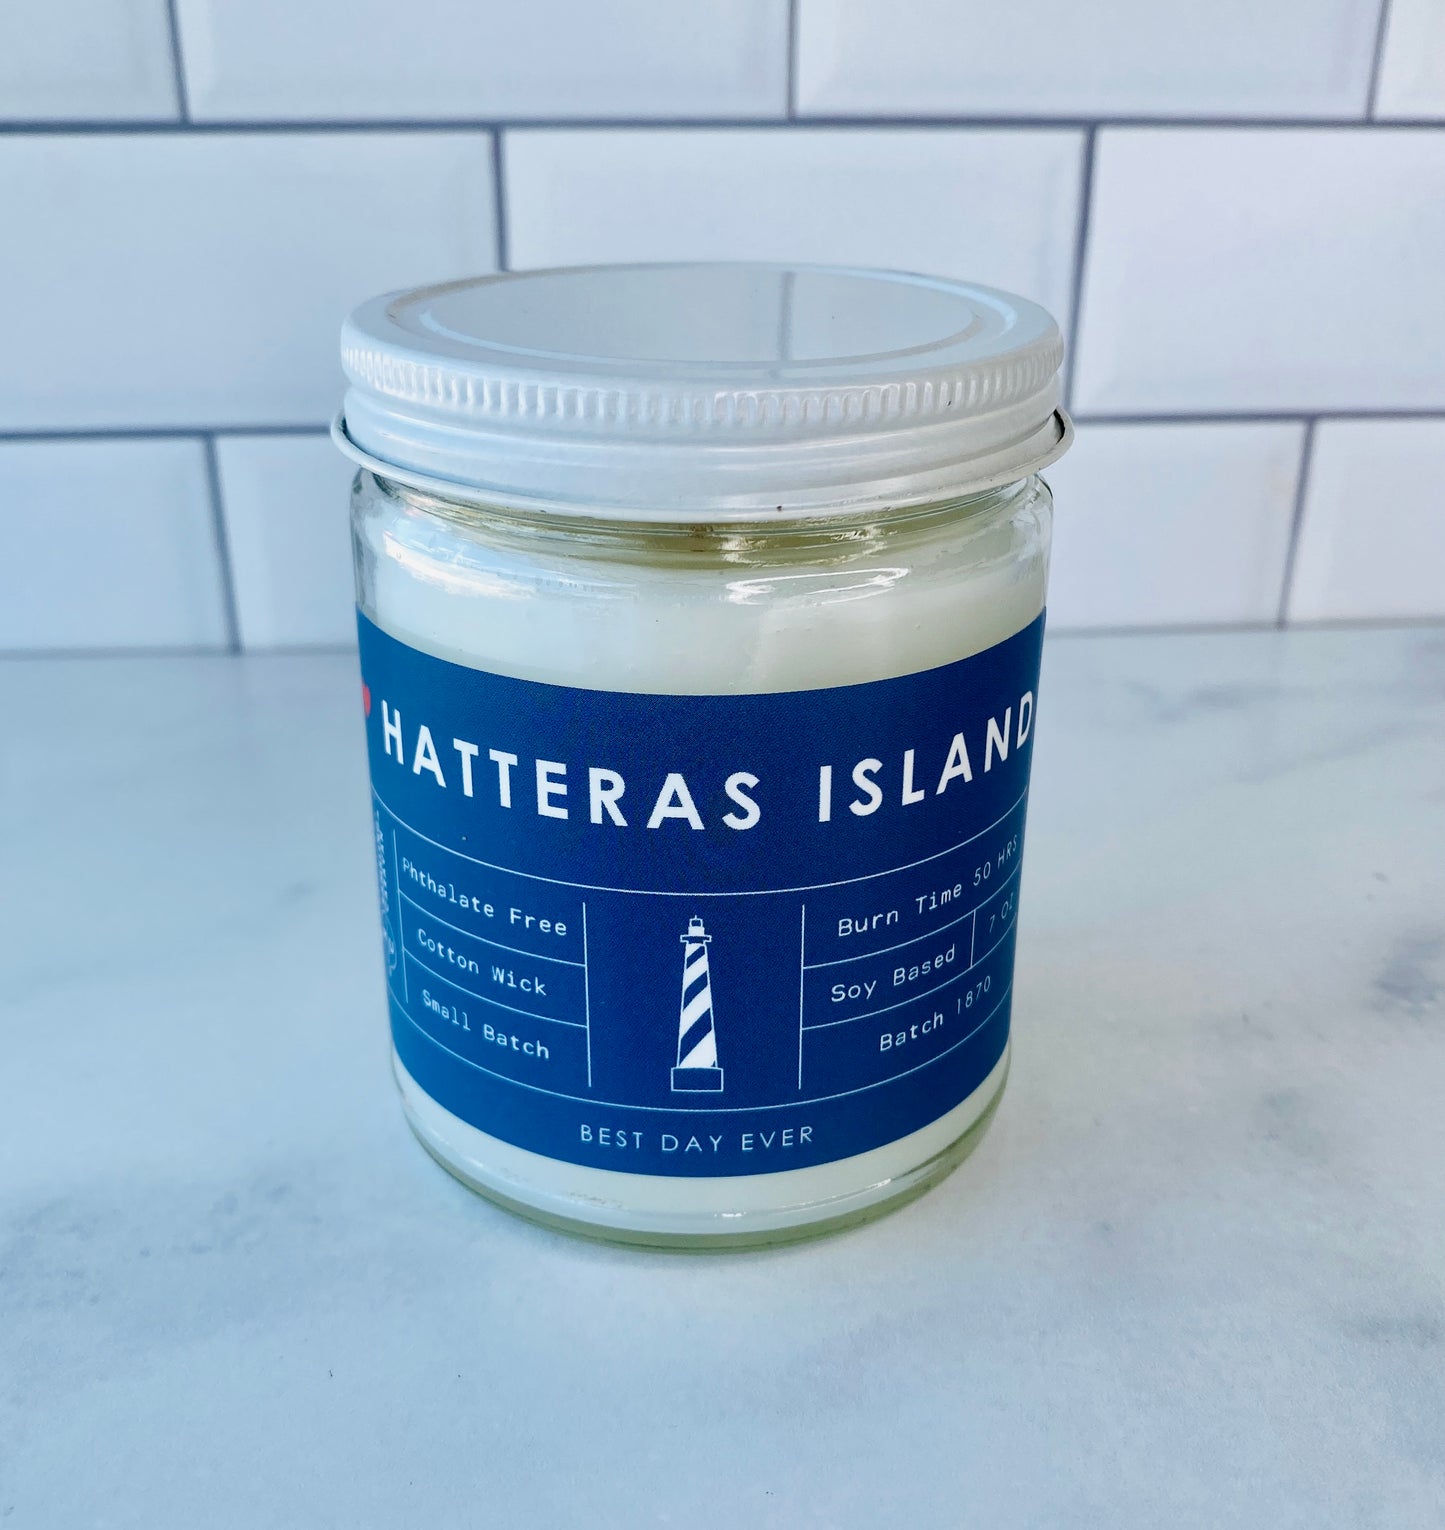 Hatteras Island, Outer Banks, NC Candle